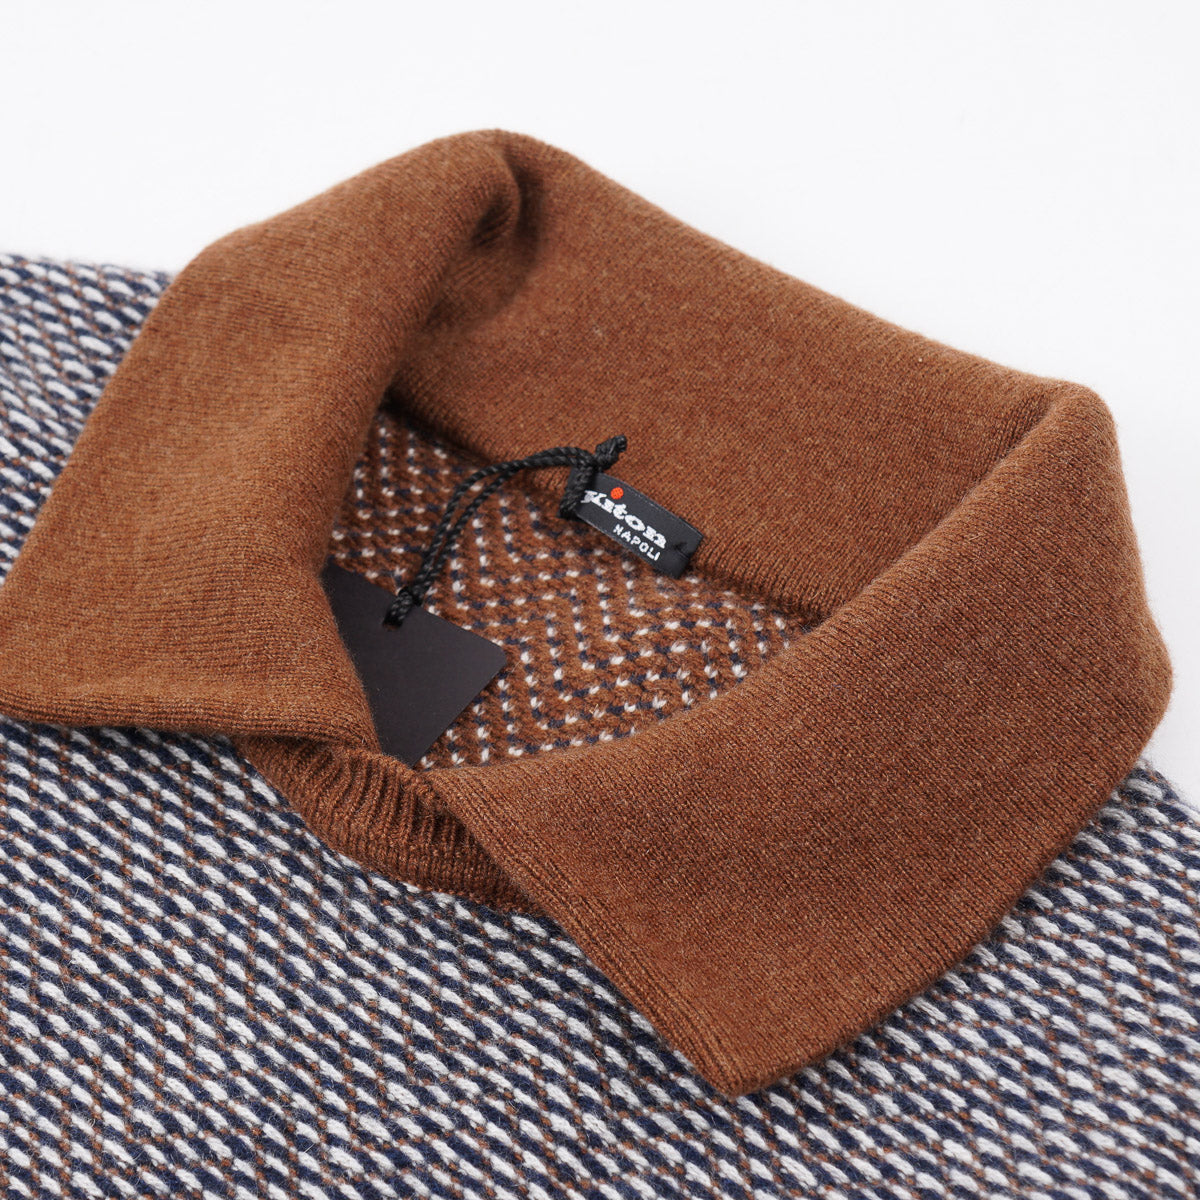 Kiton Knit Cashmere Sweater with Collar - Top Shelf Apparel